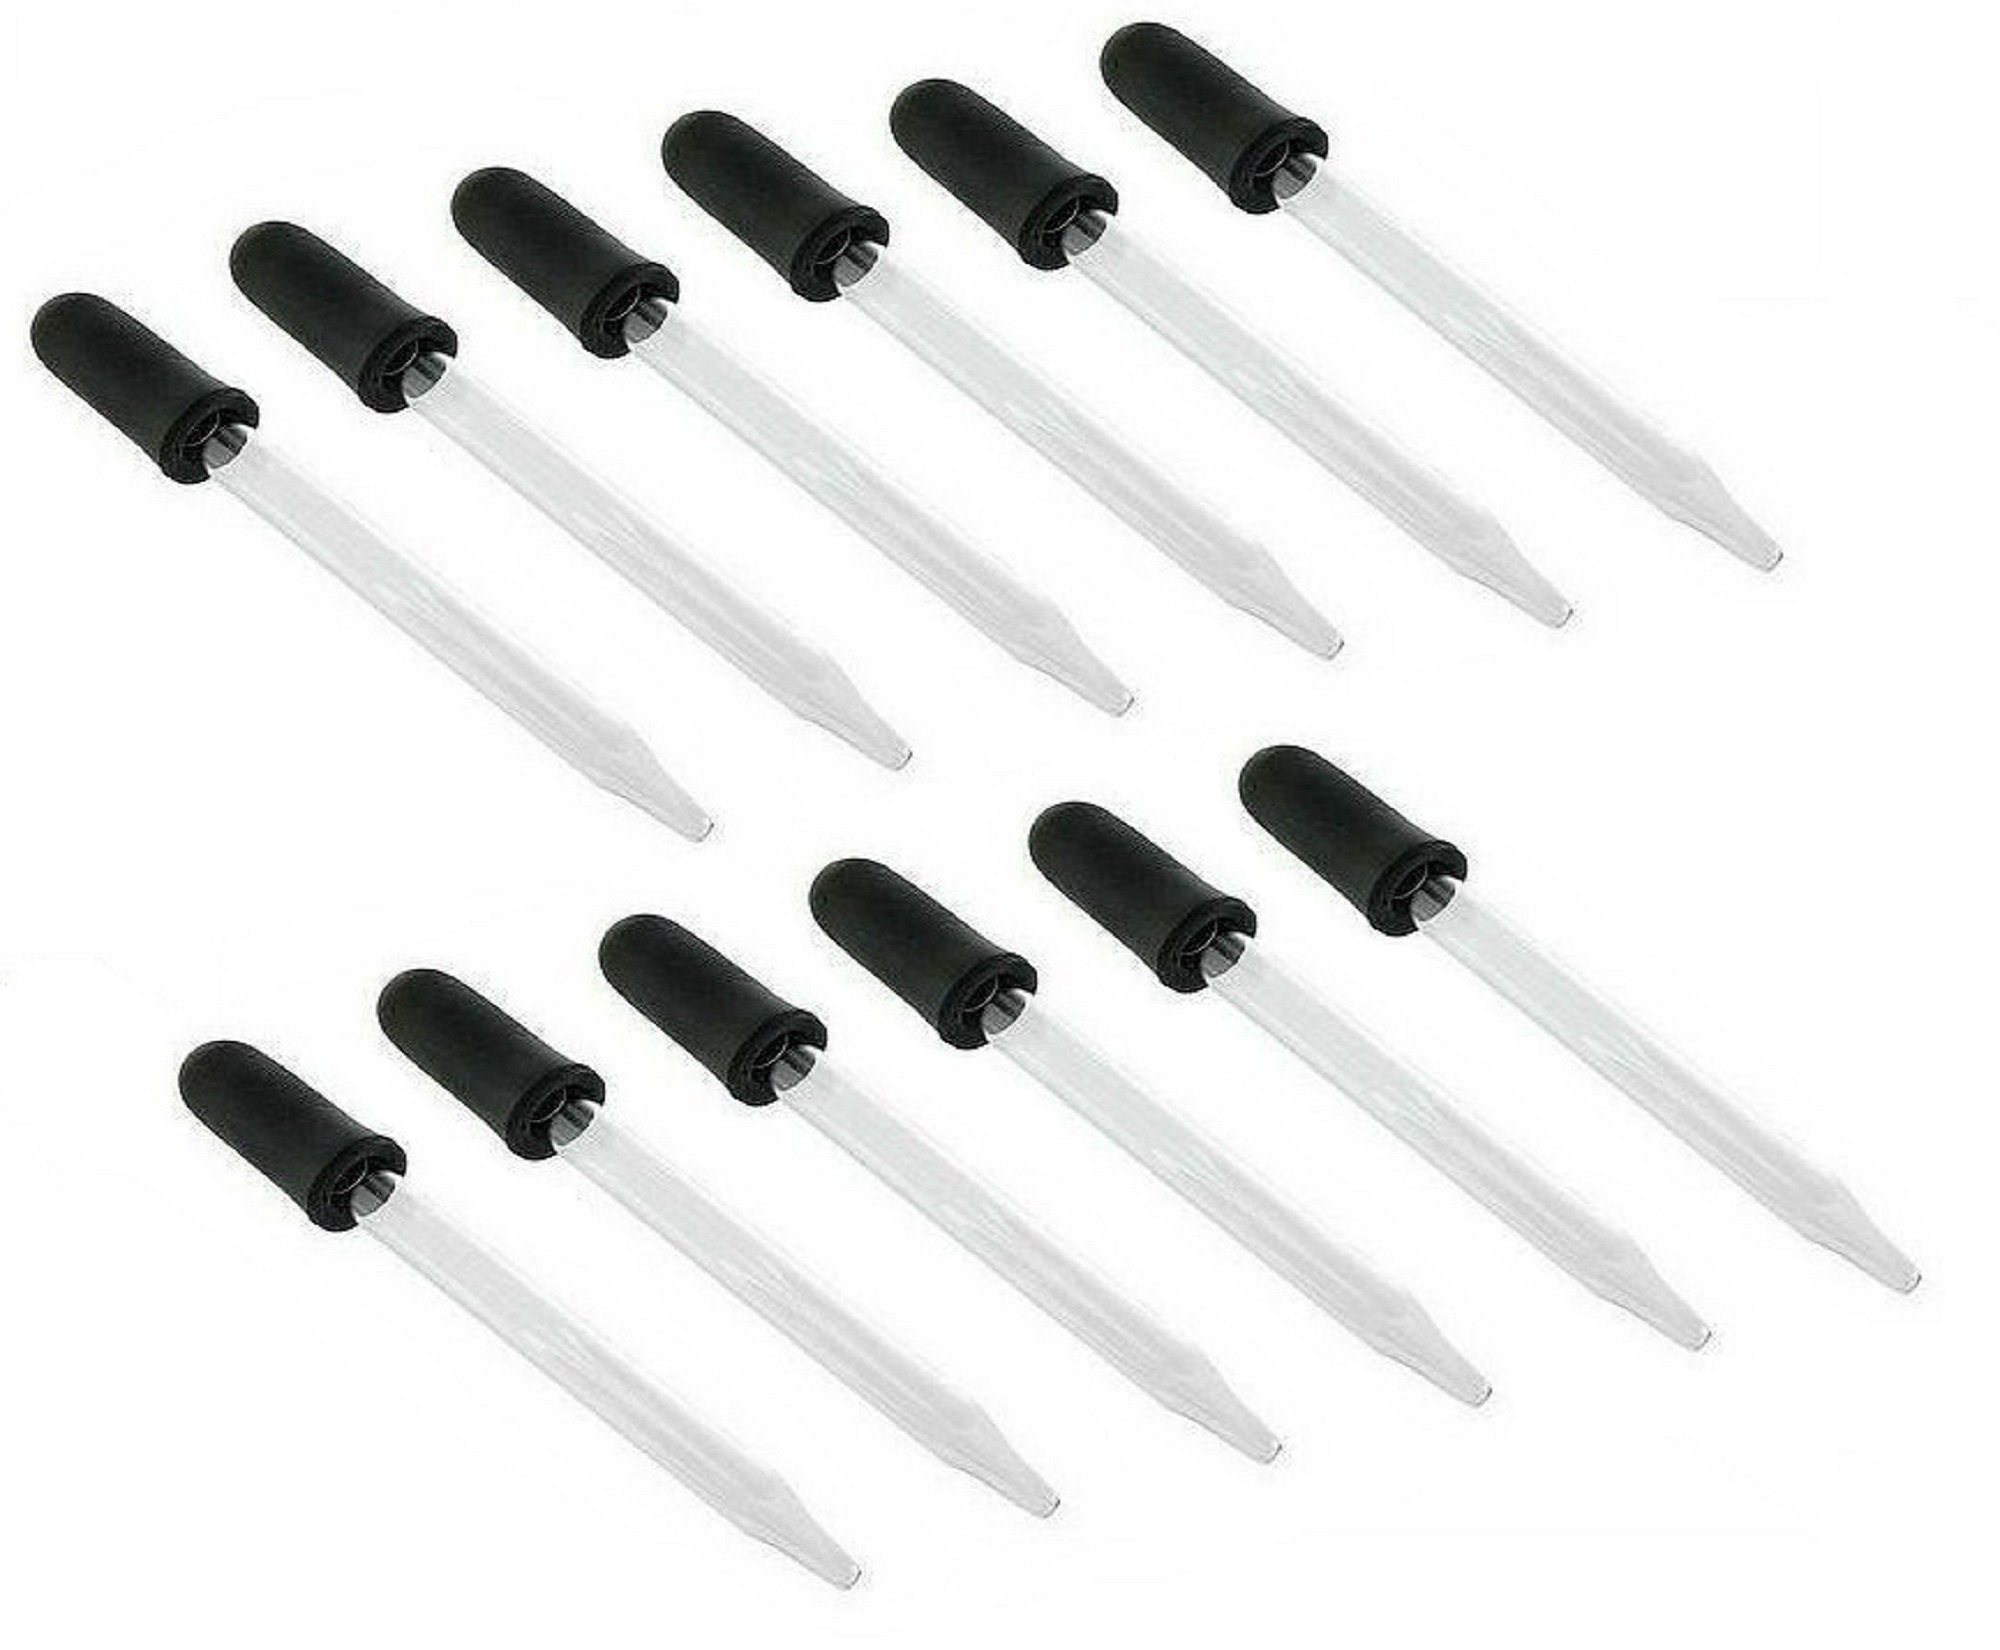 Set of 12 Pcs Glass Pipette Pipet Medicine Eye Droppers hq nude image